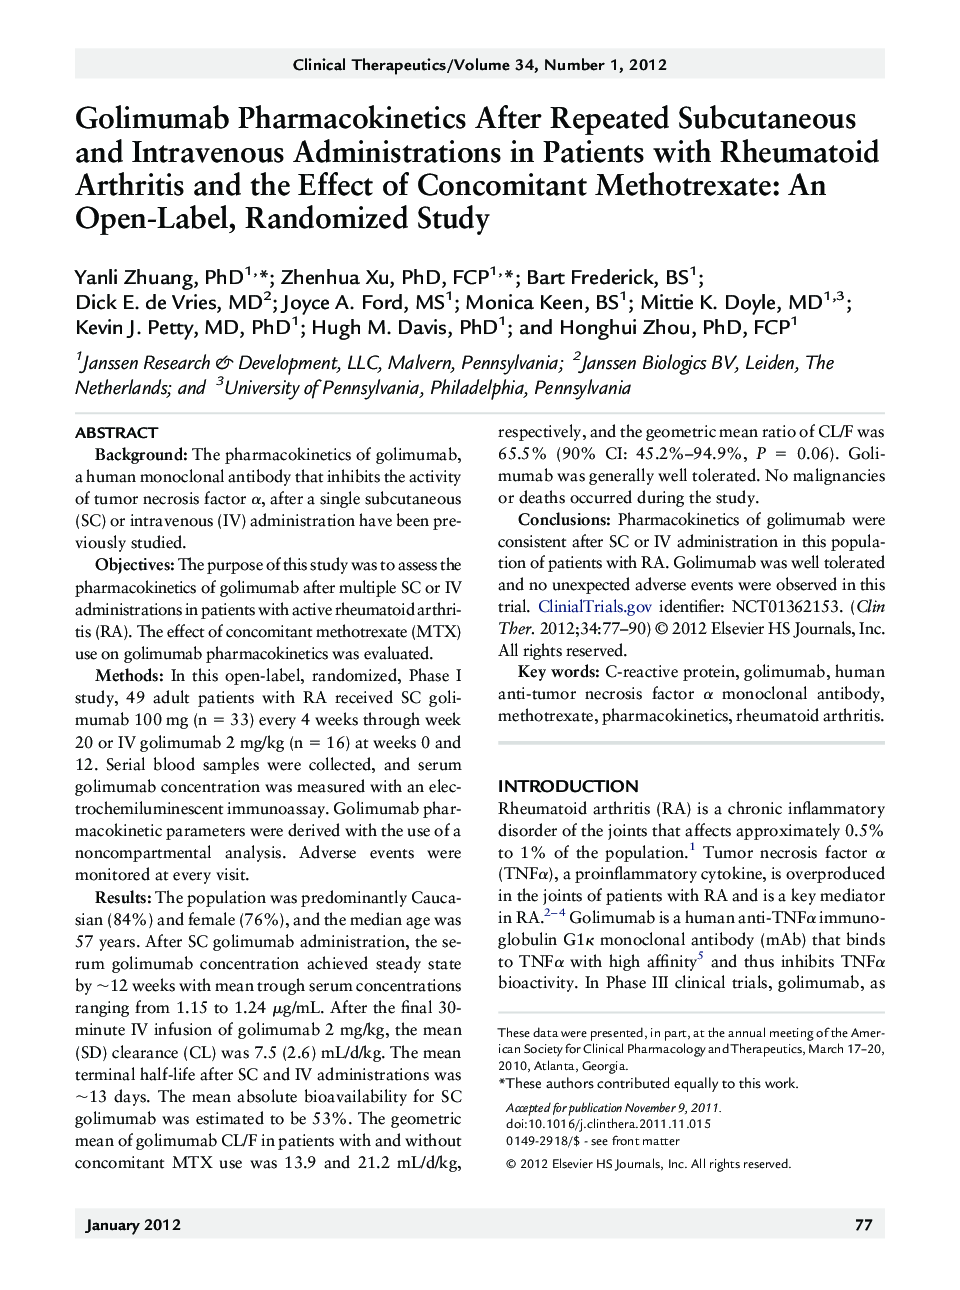 Golimumab Pharmacokinetics After Repeated Subcutaneous and Intravenous Administrations in Patients with Rheumatoid Arthritis and the Effect of Concomitant Methotrexate: An Open-Label, Randomized Study